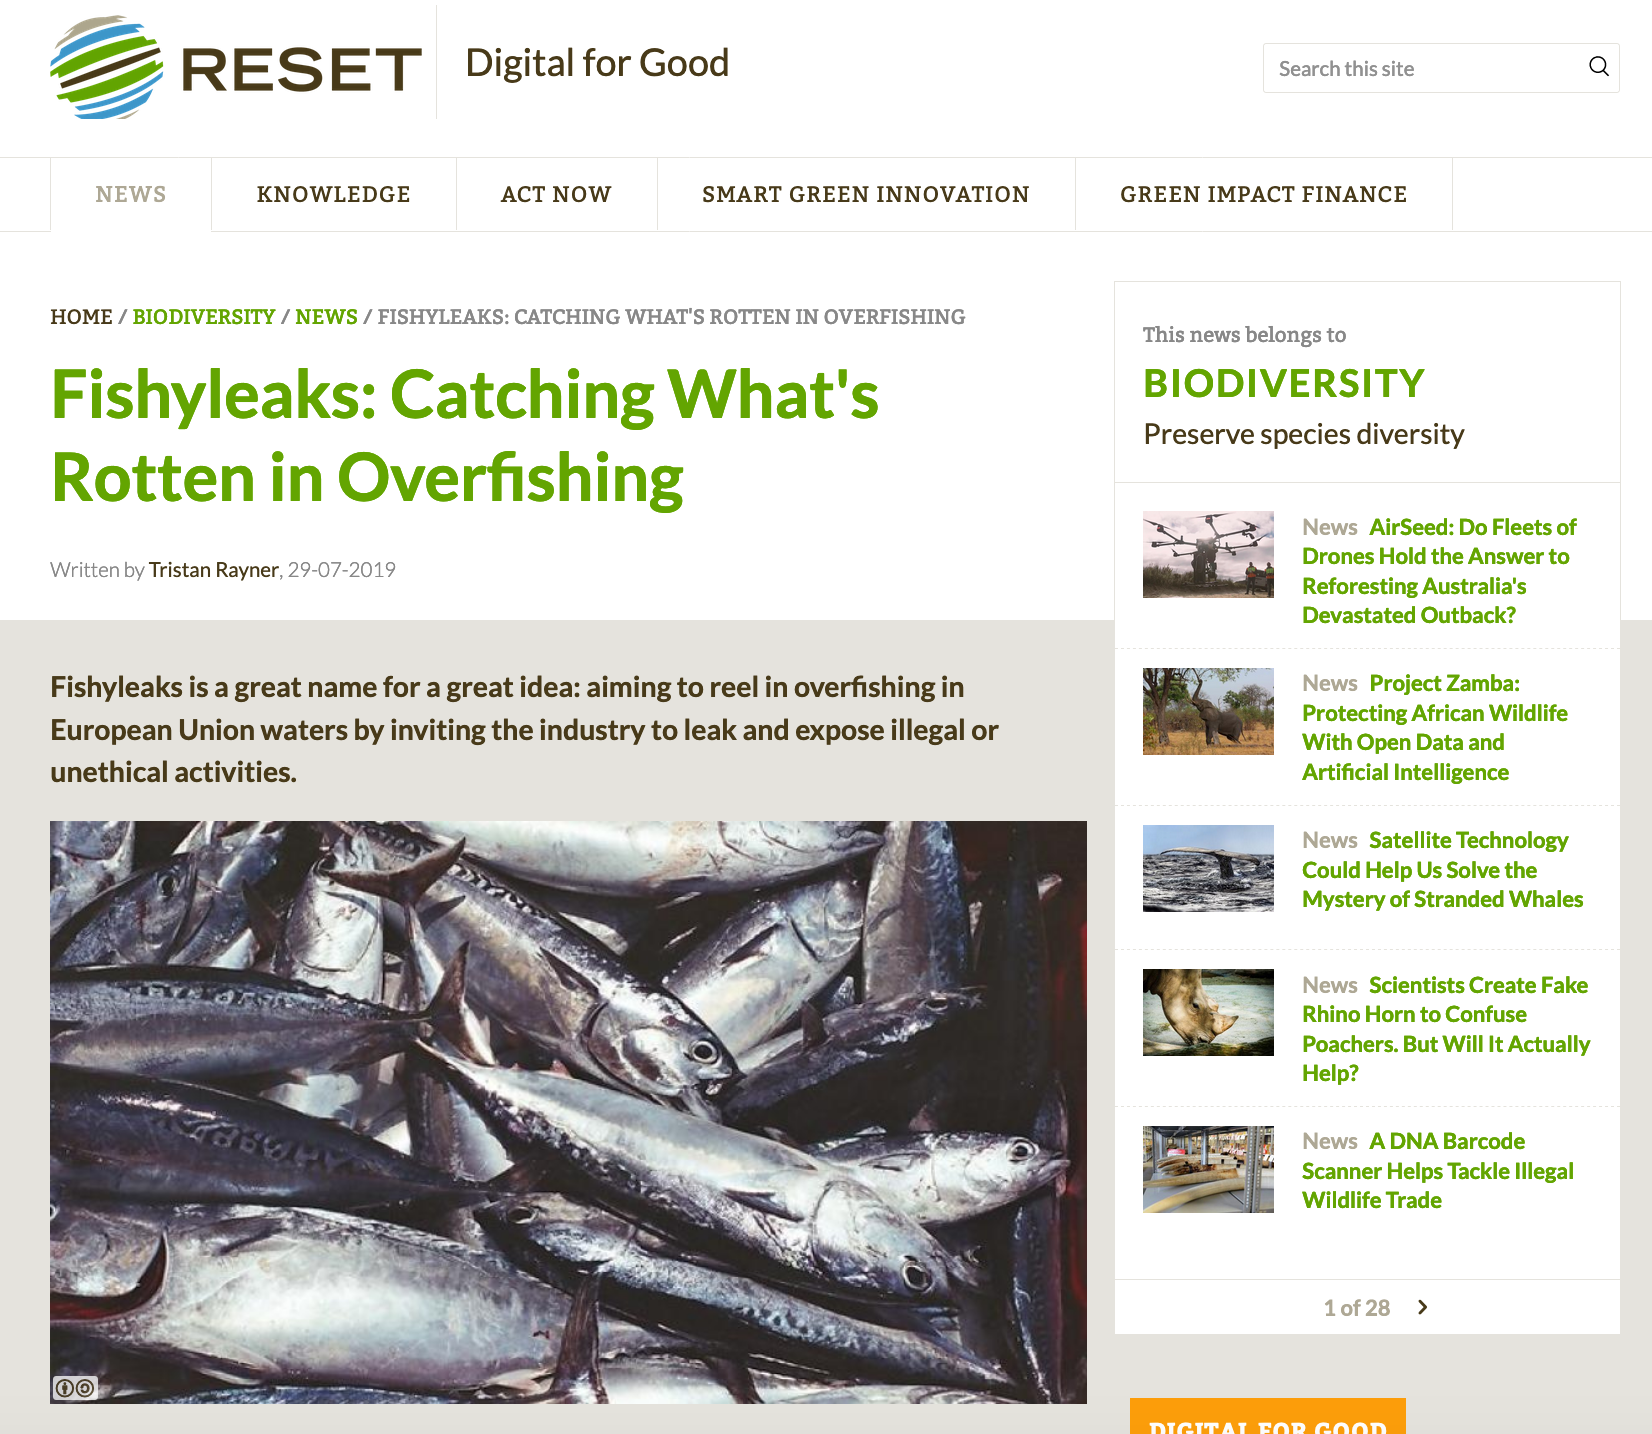 Fishyleaks: Catching What's Rotten in Overfishing